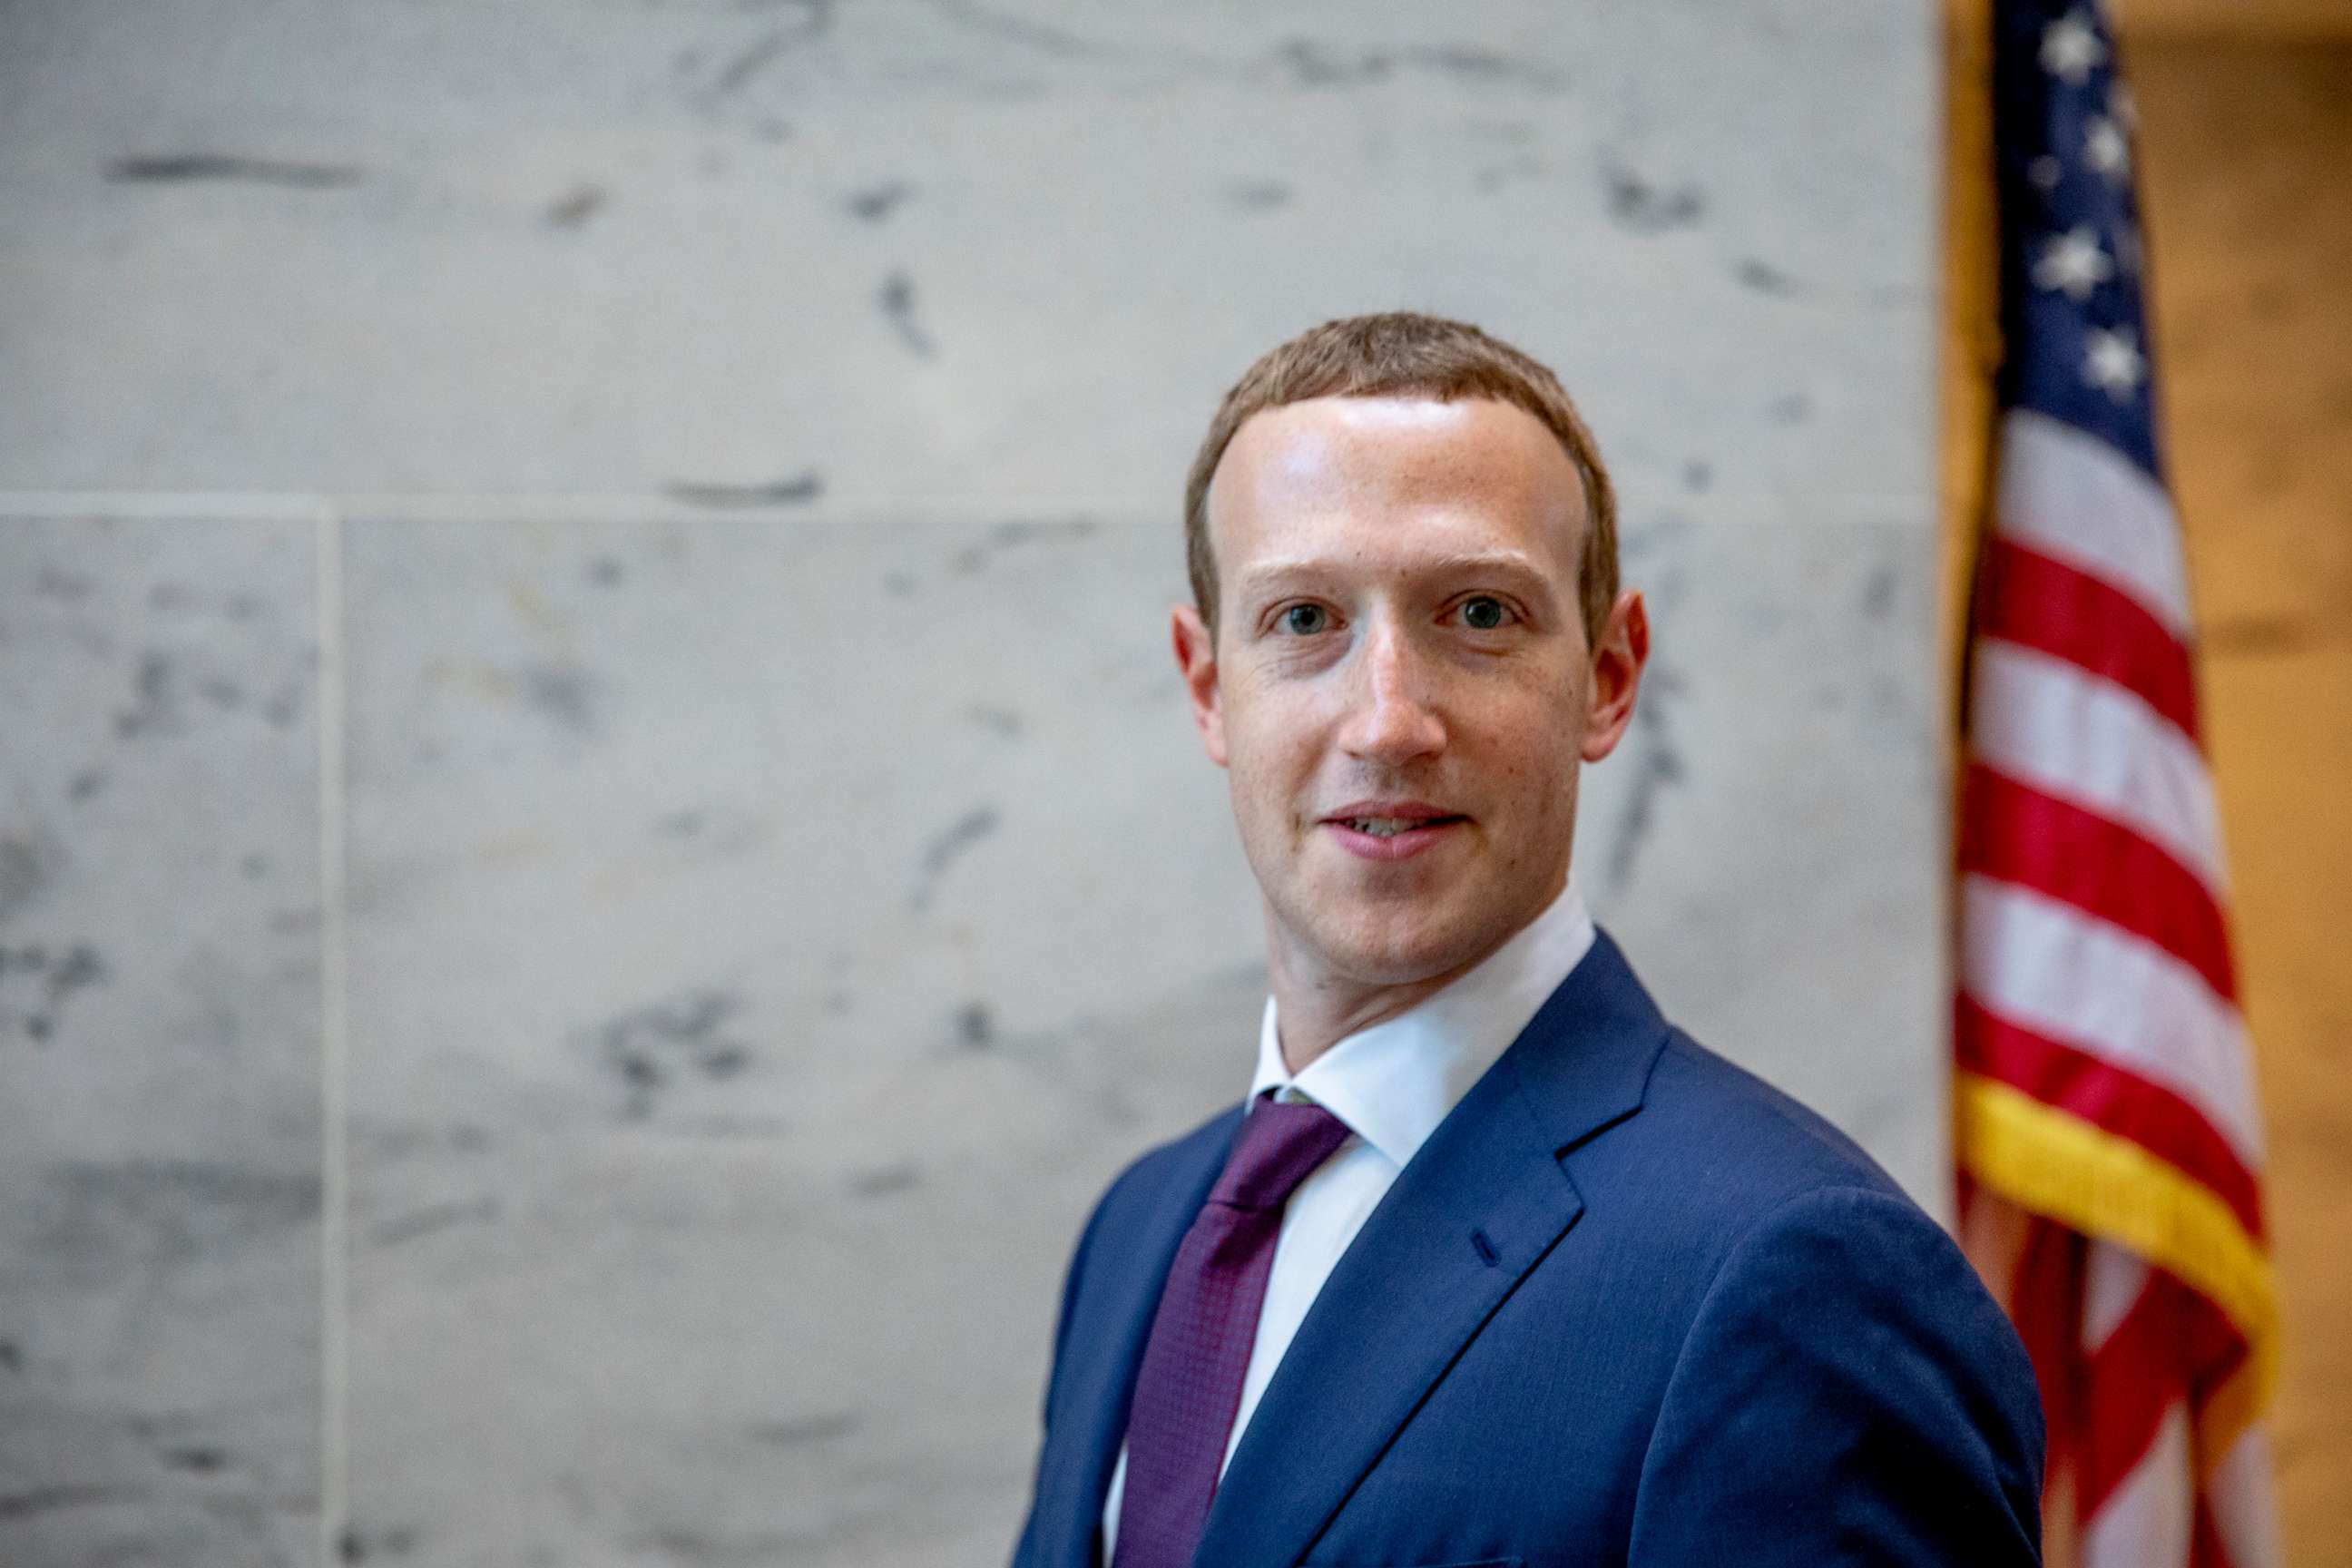 PHOTO: Facebook founder and CEO Mark Zuckerberg leaves a meeting with Senator John Cornyn in his office on Capitol Hill on Sept. 19, 2019, in Washington, D.C.